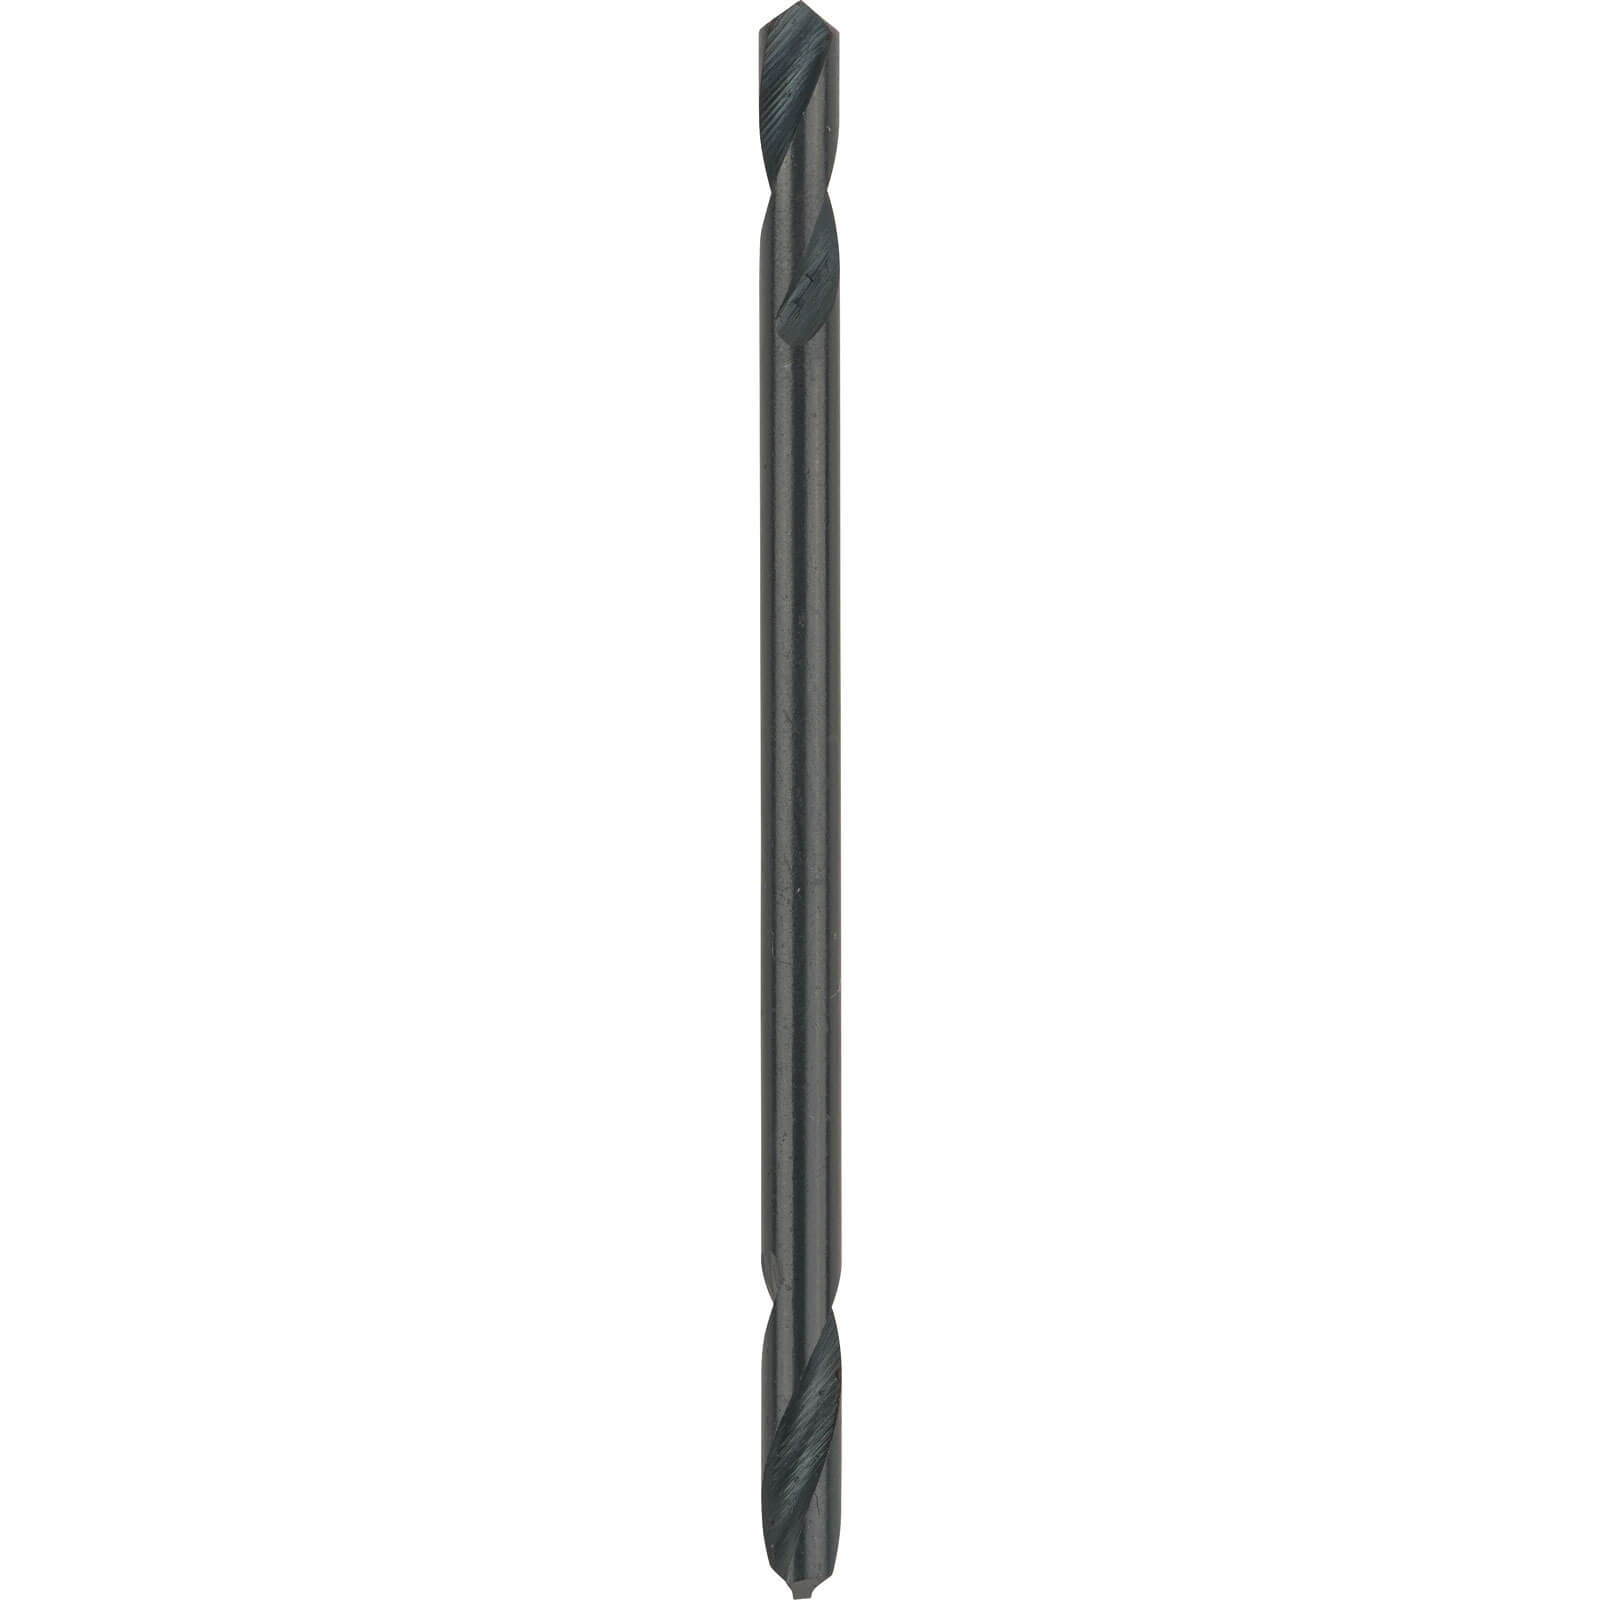 Photos - Drill Bit Bosch HSS-G Double Ended Stub  2.5mm Pack of 10 2608597581 